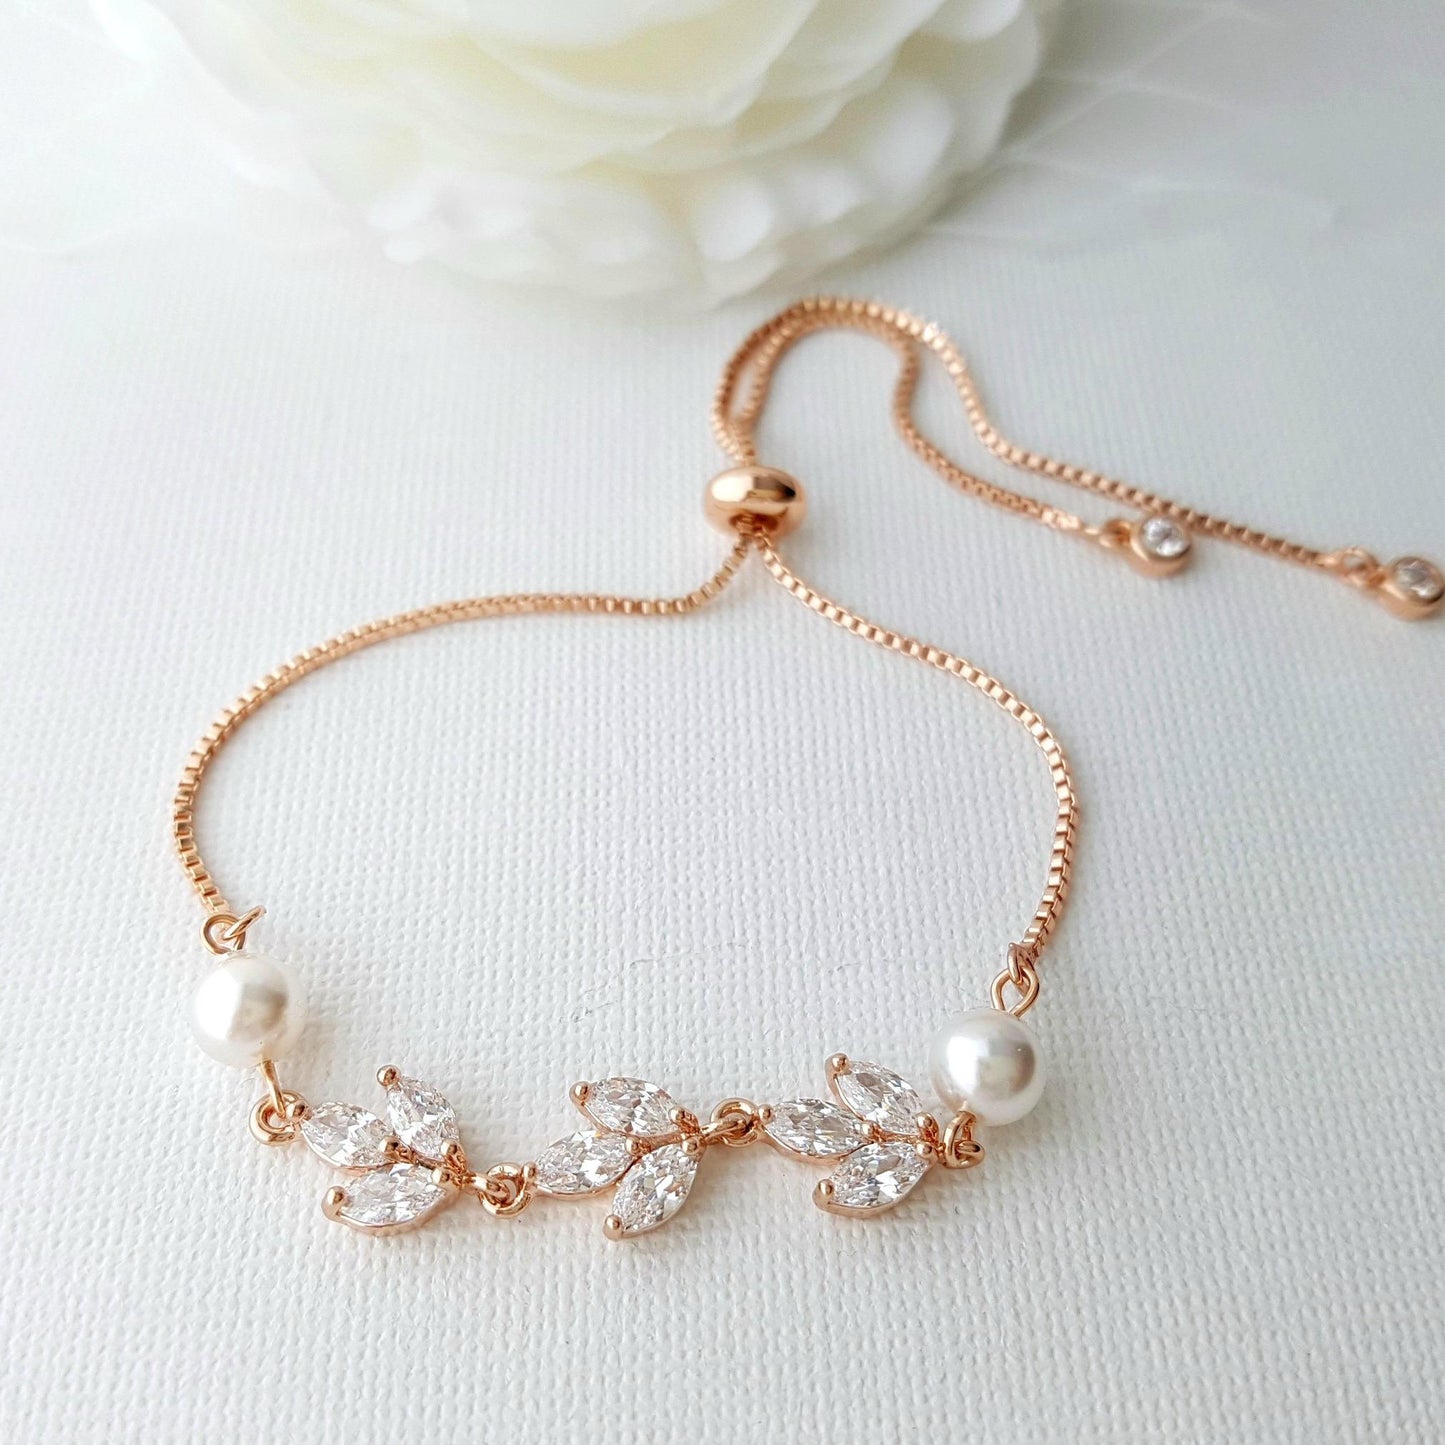 Delicate Gold Bracelet for Brides & Ladies in Marquise Cubic Zirconia( CZ) for Wedding Or Prom- Leila - PoetryDesigns